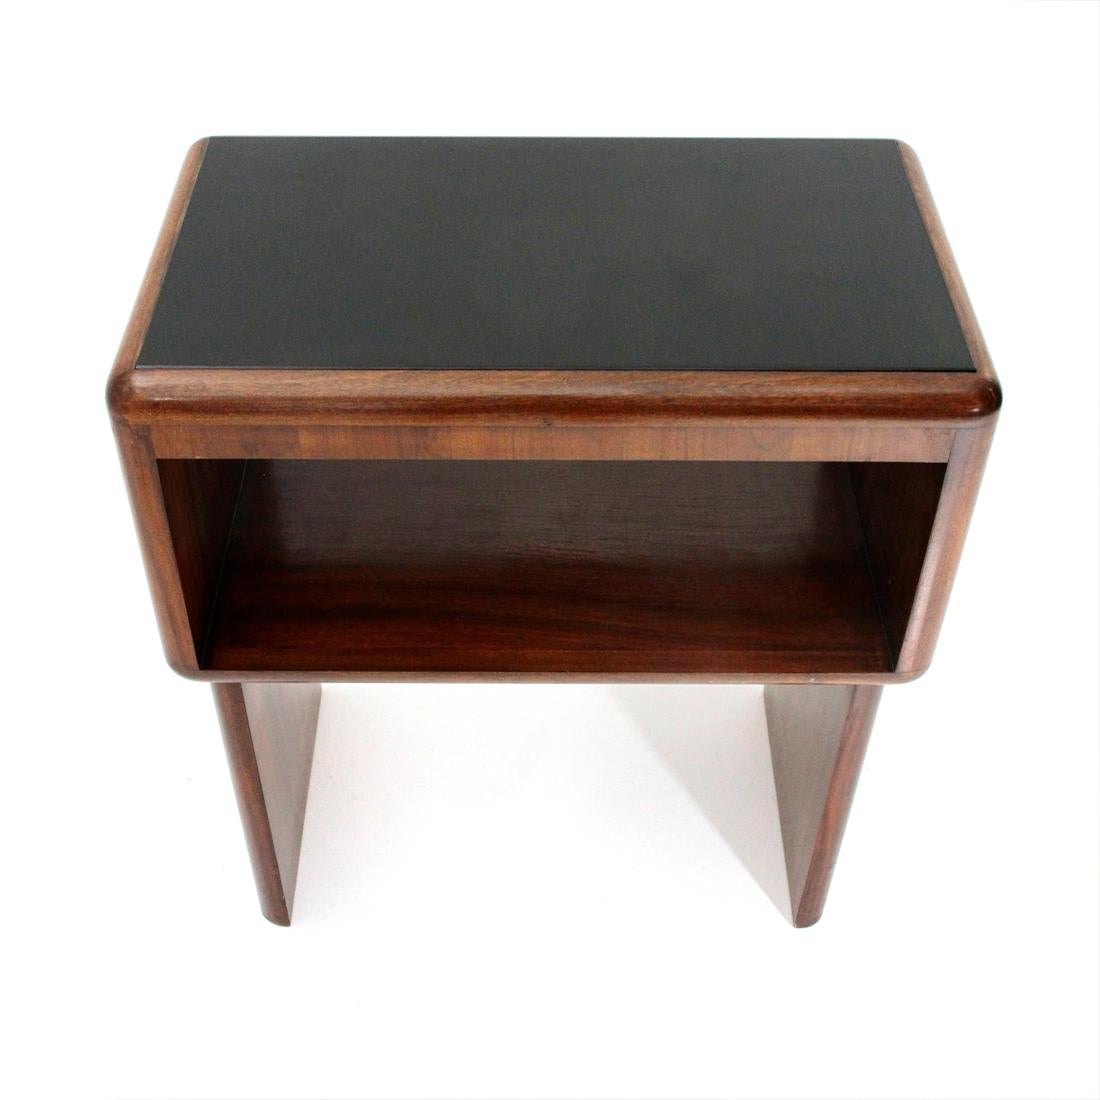 Italian-made little cabinet manufactured in the 1950s.
Structure in veneered wood.
Rounded corners and edges.
Upper top in black glass.
Good general conditions, some signs due to normal use over time.

Dimensions: Length 64 cm, depth 38 cm,